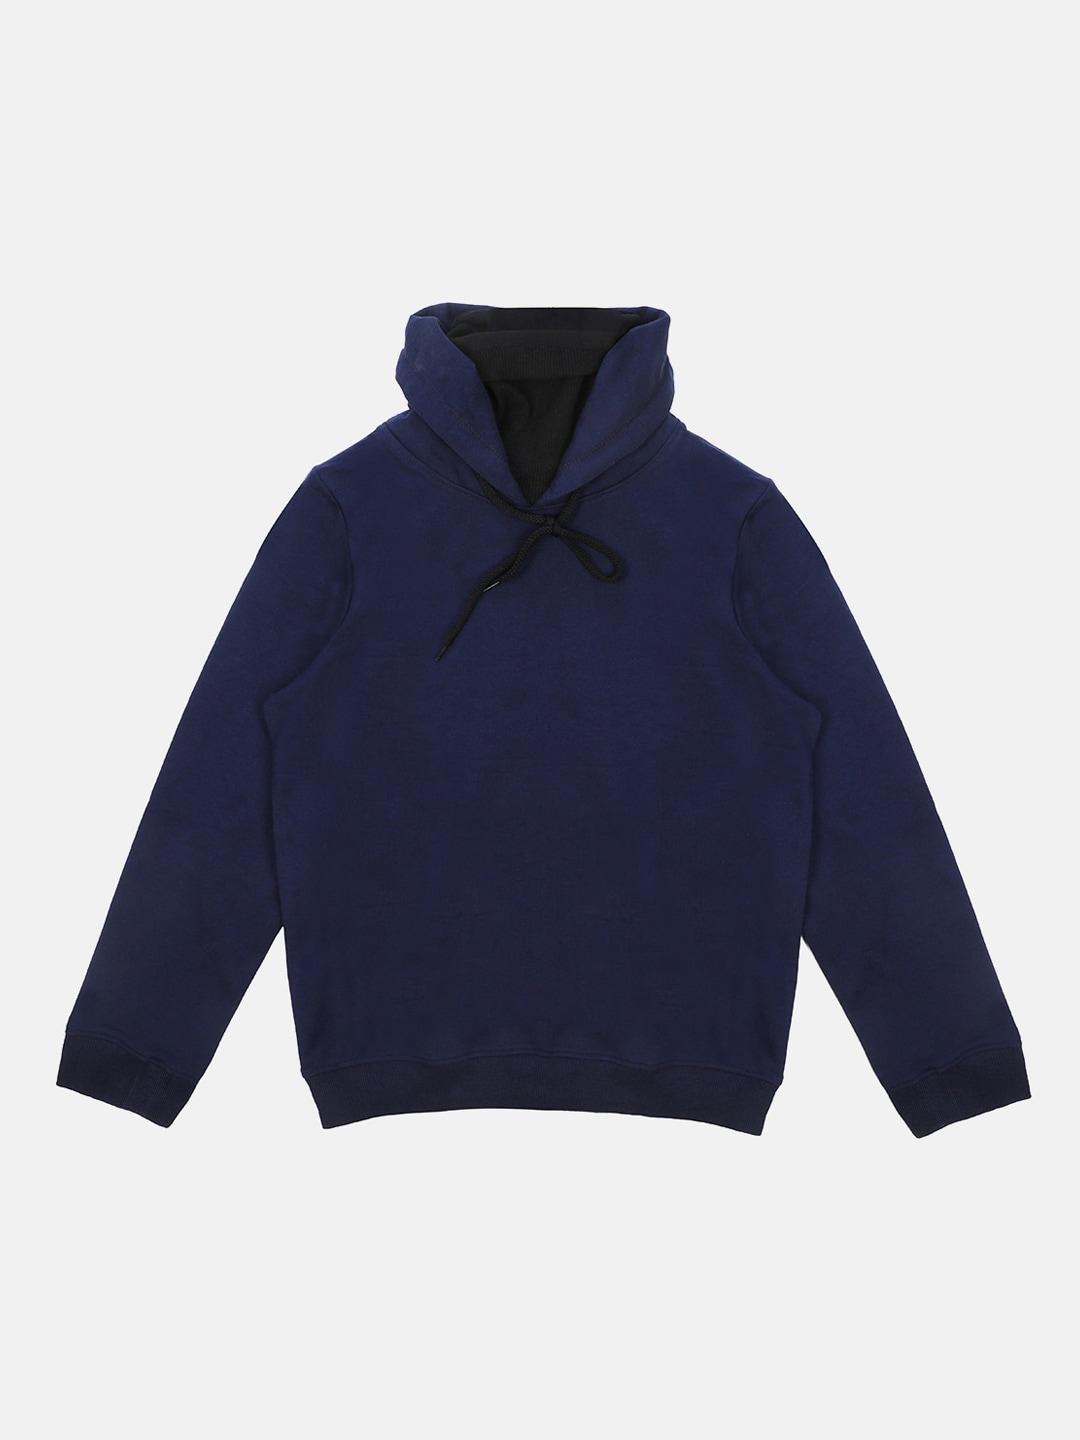 wear-your-mind-boys-navy-blue-solid-hooded-sweatshirt-with-attached-face-covering